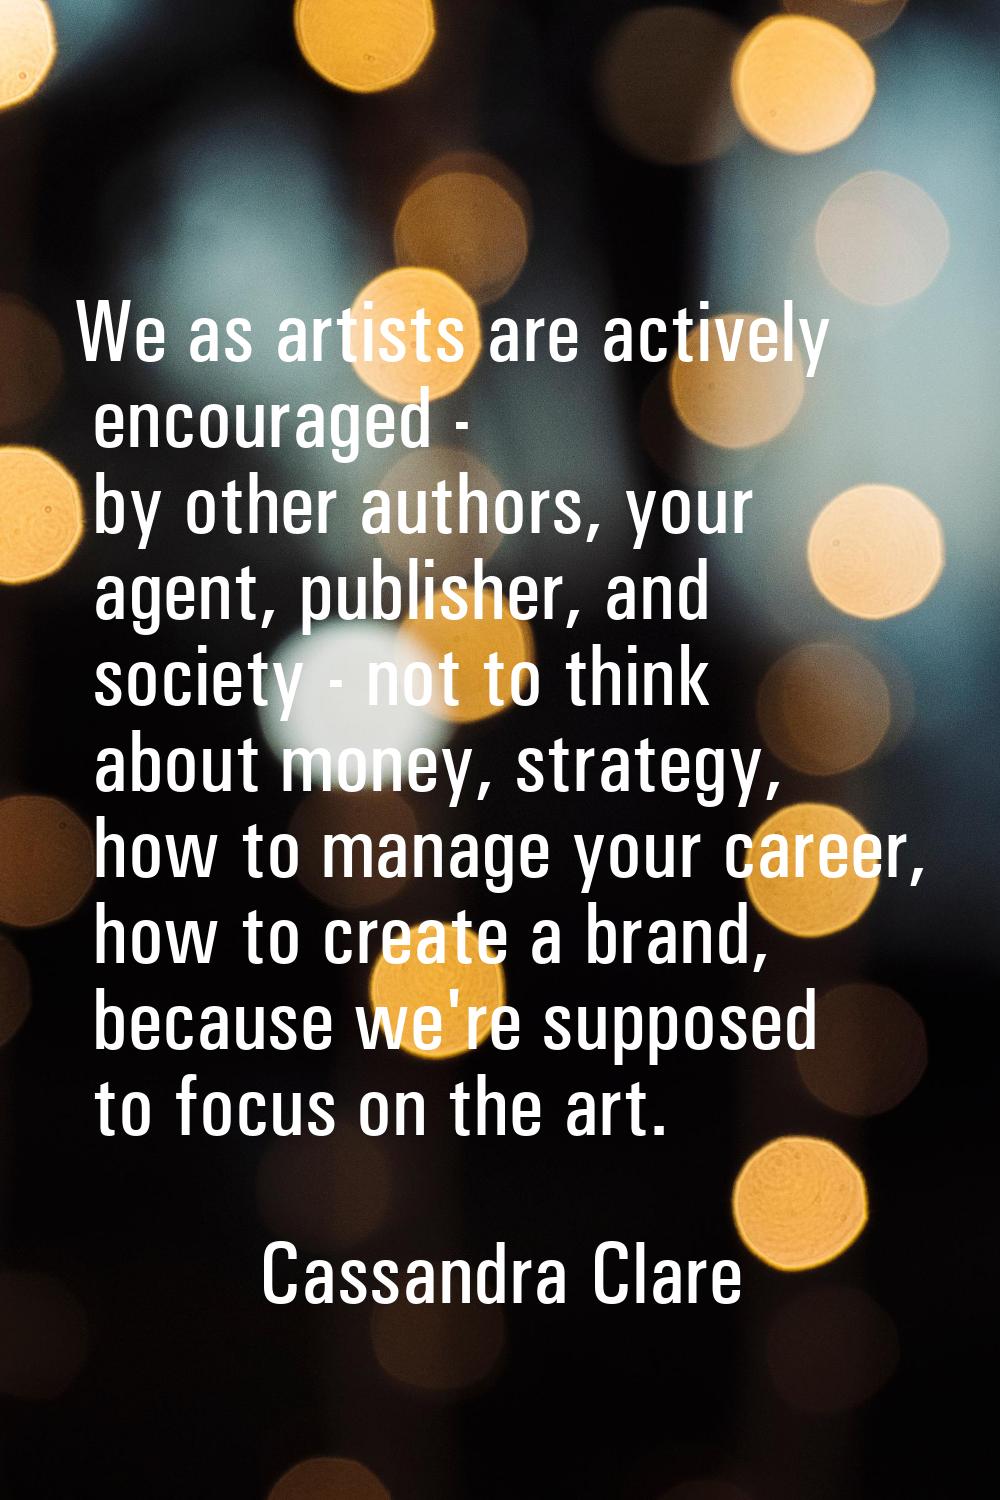 We as artists are actively encouraged - by other authors, your agent, publisher, and society - not 